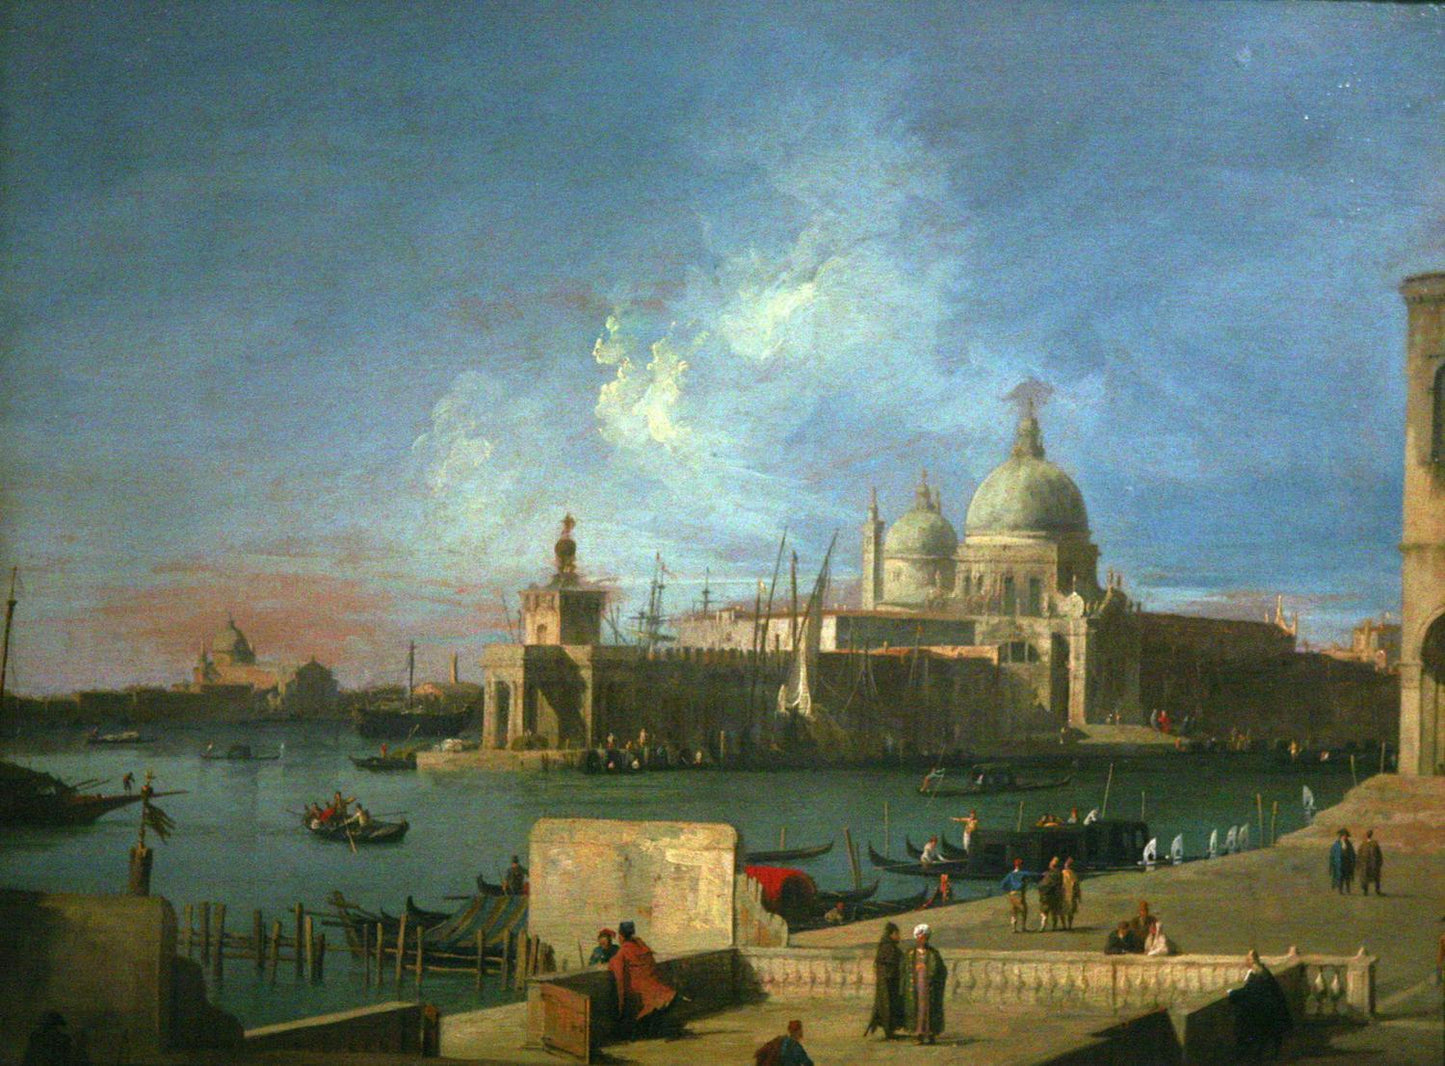 Santa Maria Salute from entrance of Great Canal, Canaletto